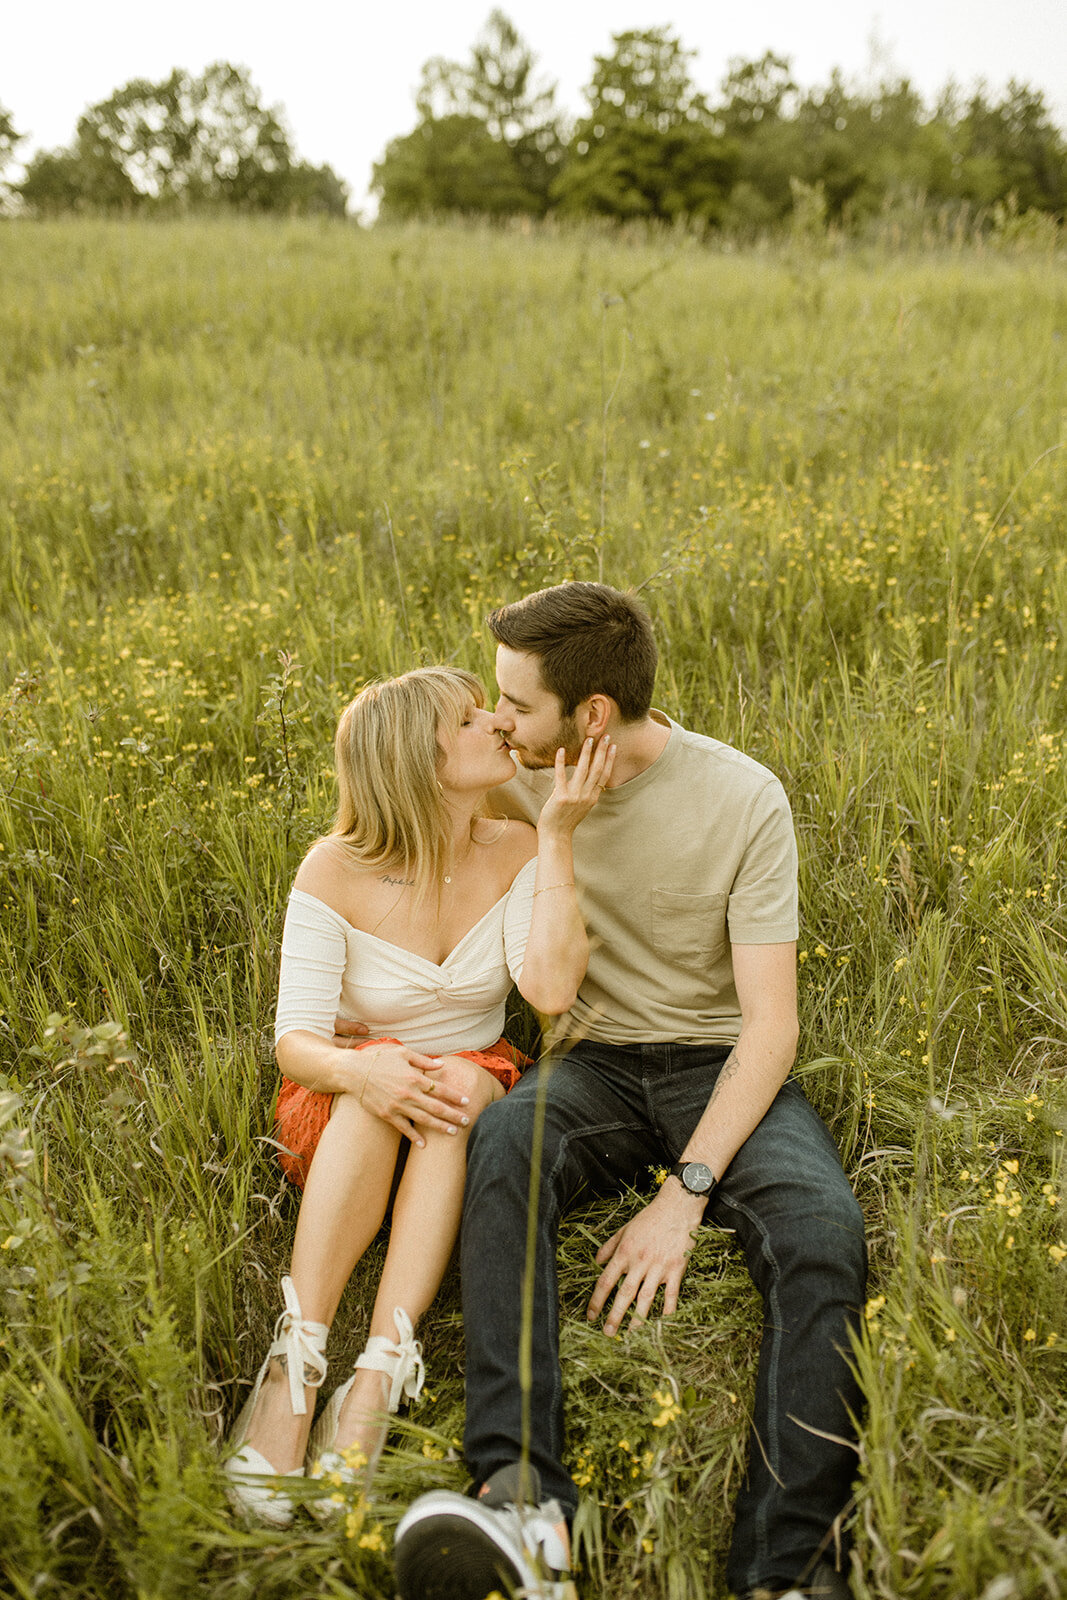 country-cut-flowers-summer-engagement-session-fun-romantic-indie-movie-wanderlust-335